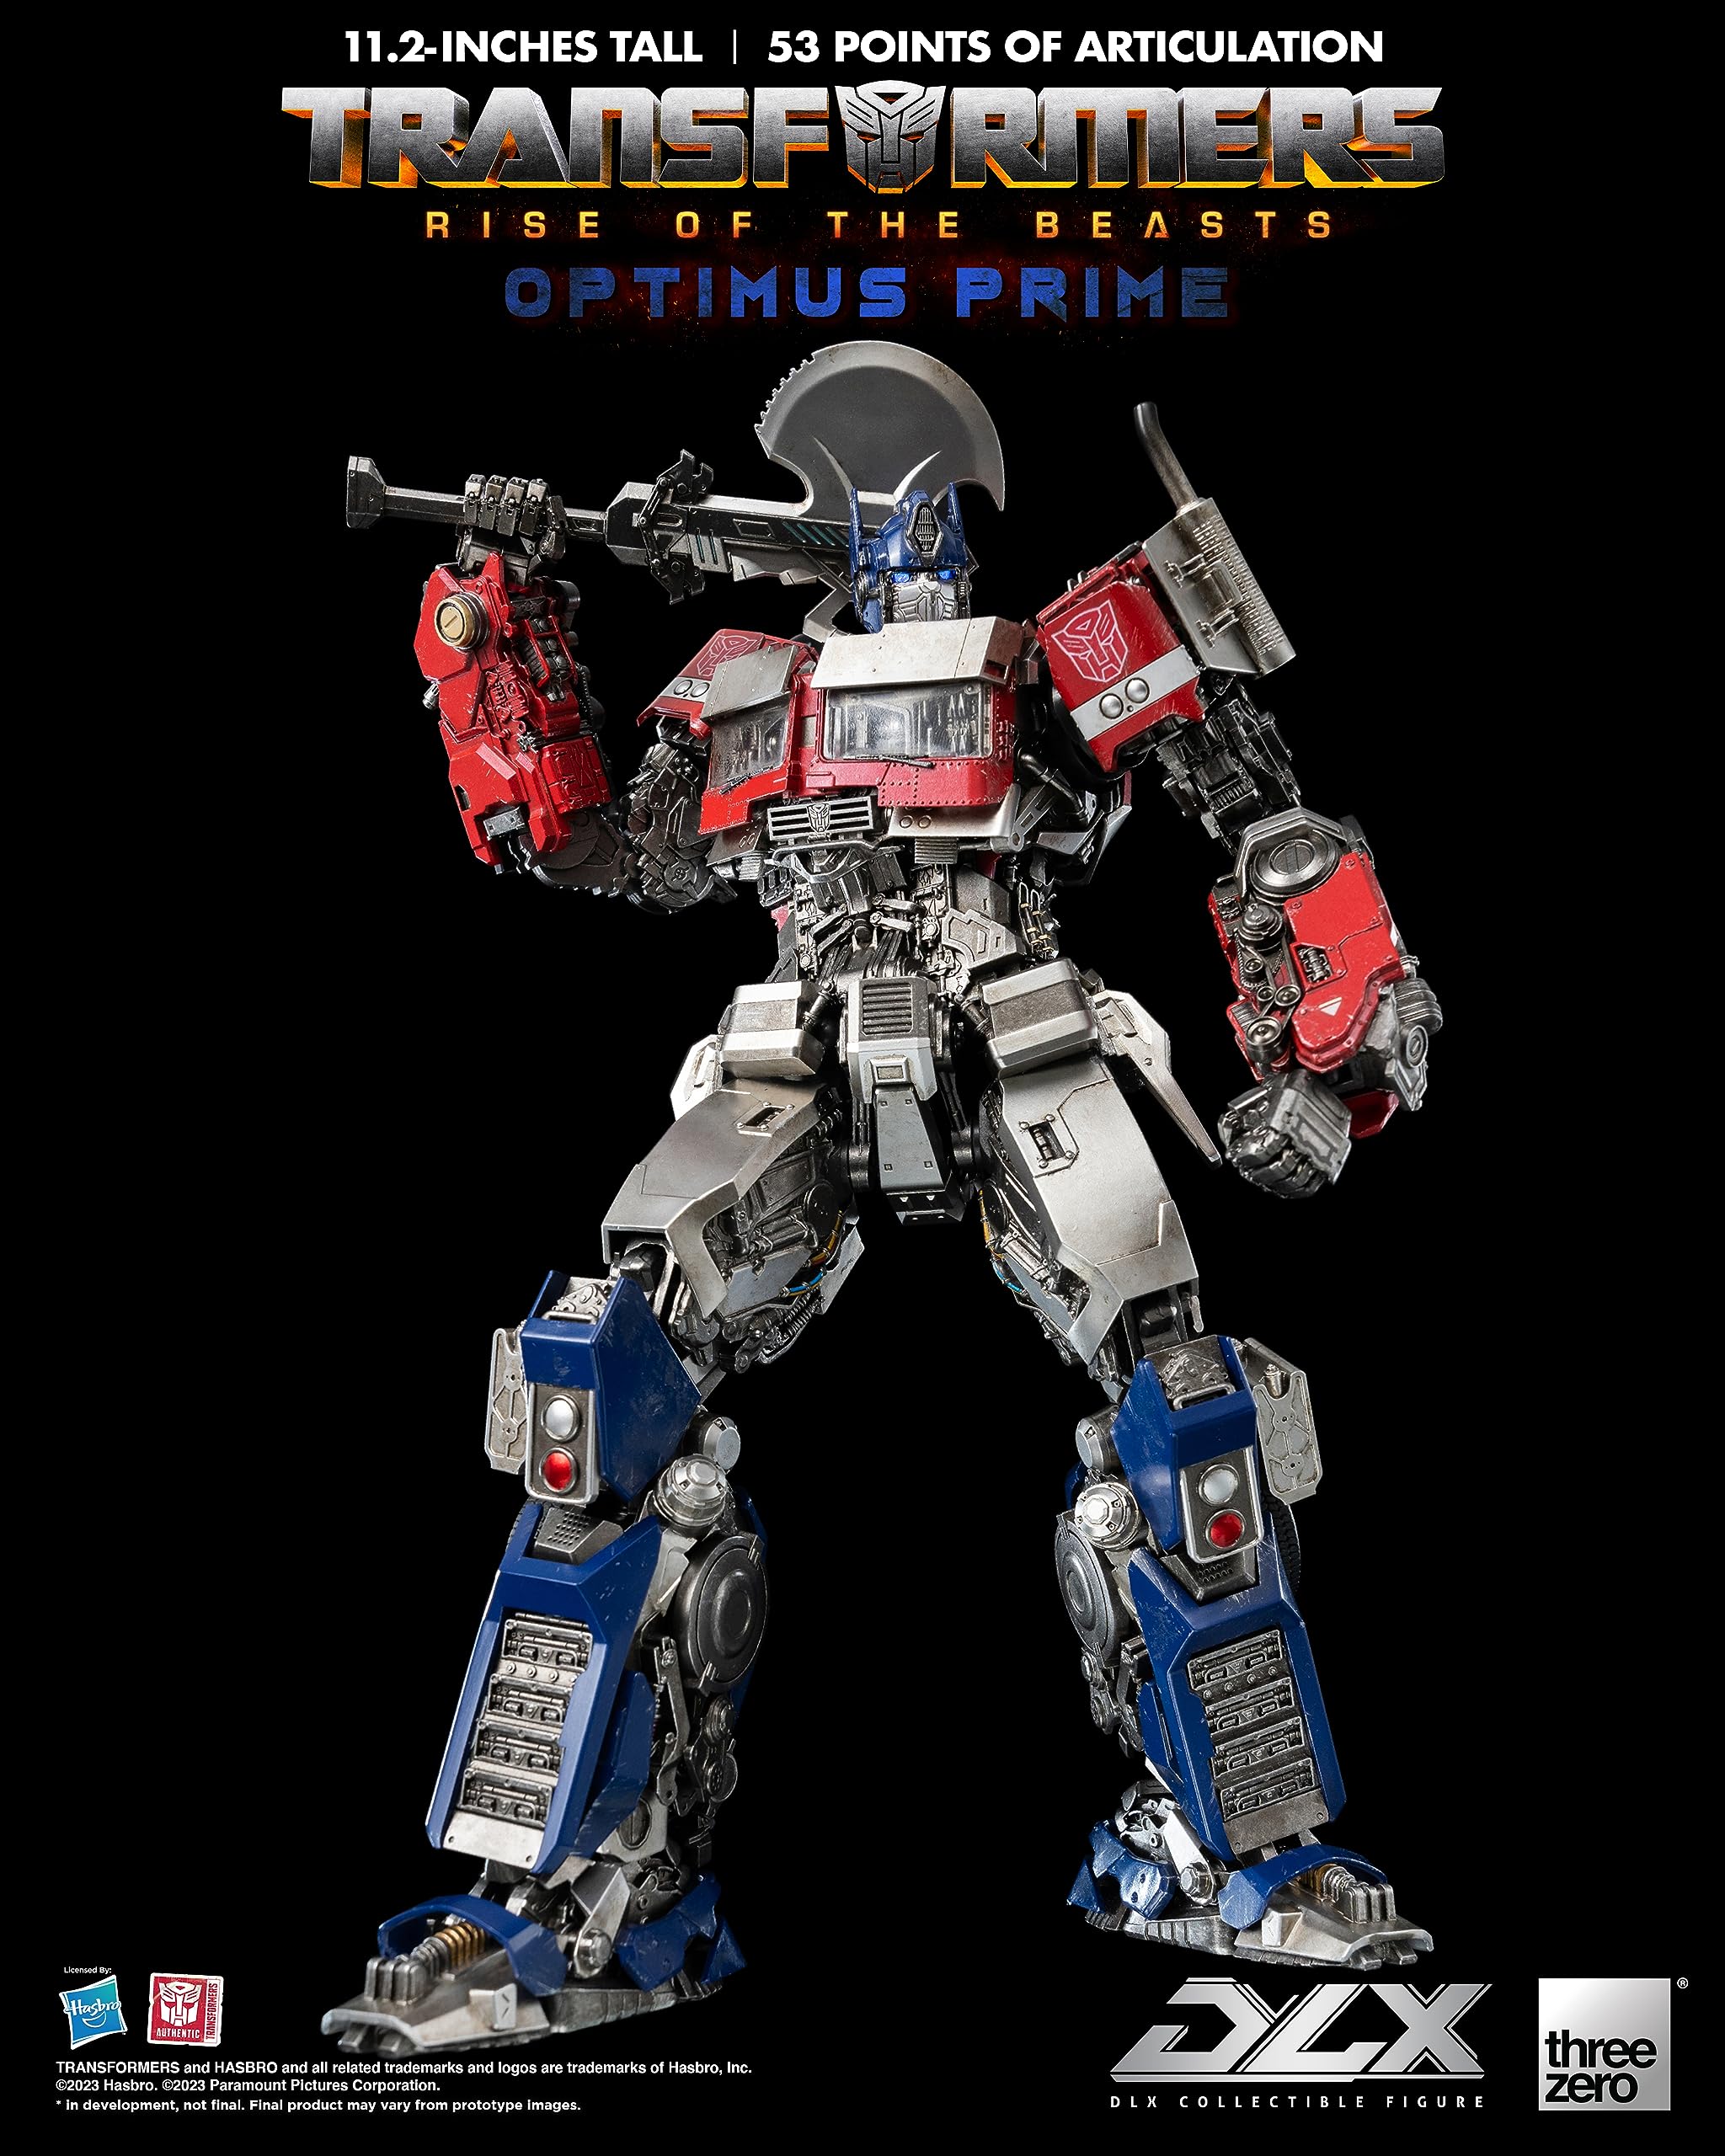 Transformers: Rise of The Beasts: DLX Optimus Prime 11.2-Inch Figure